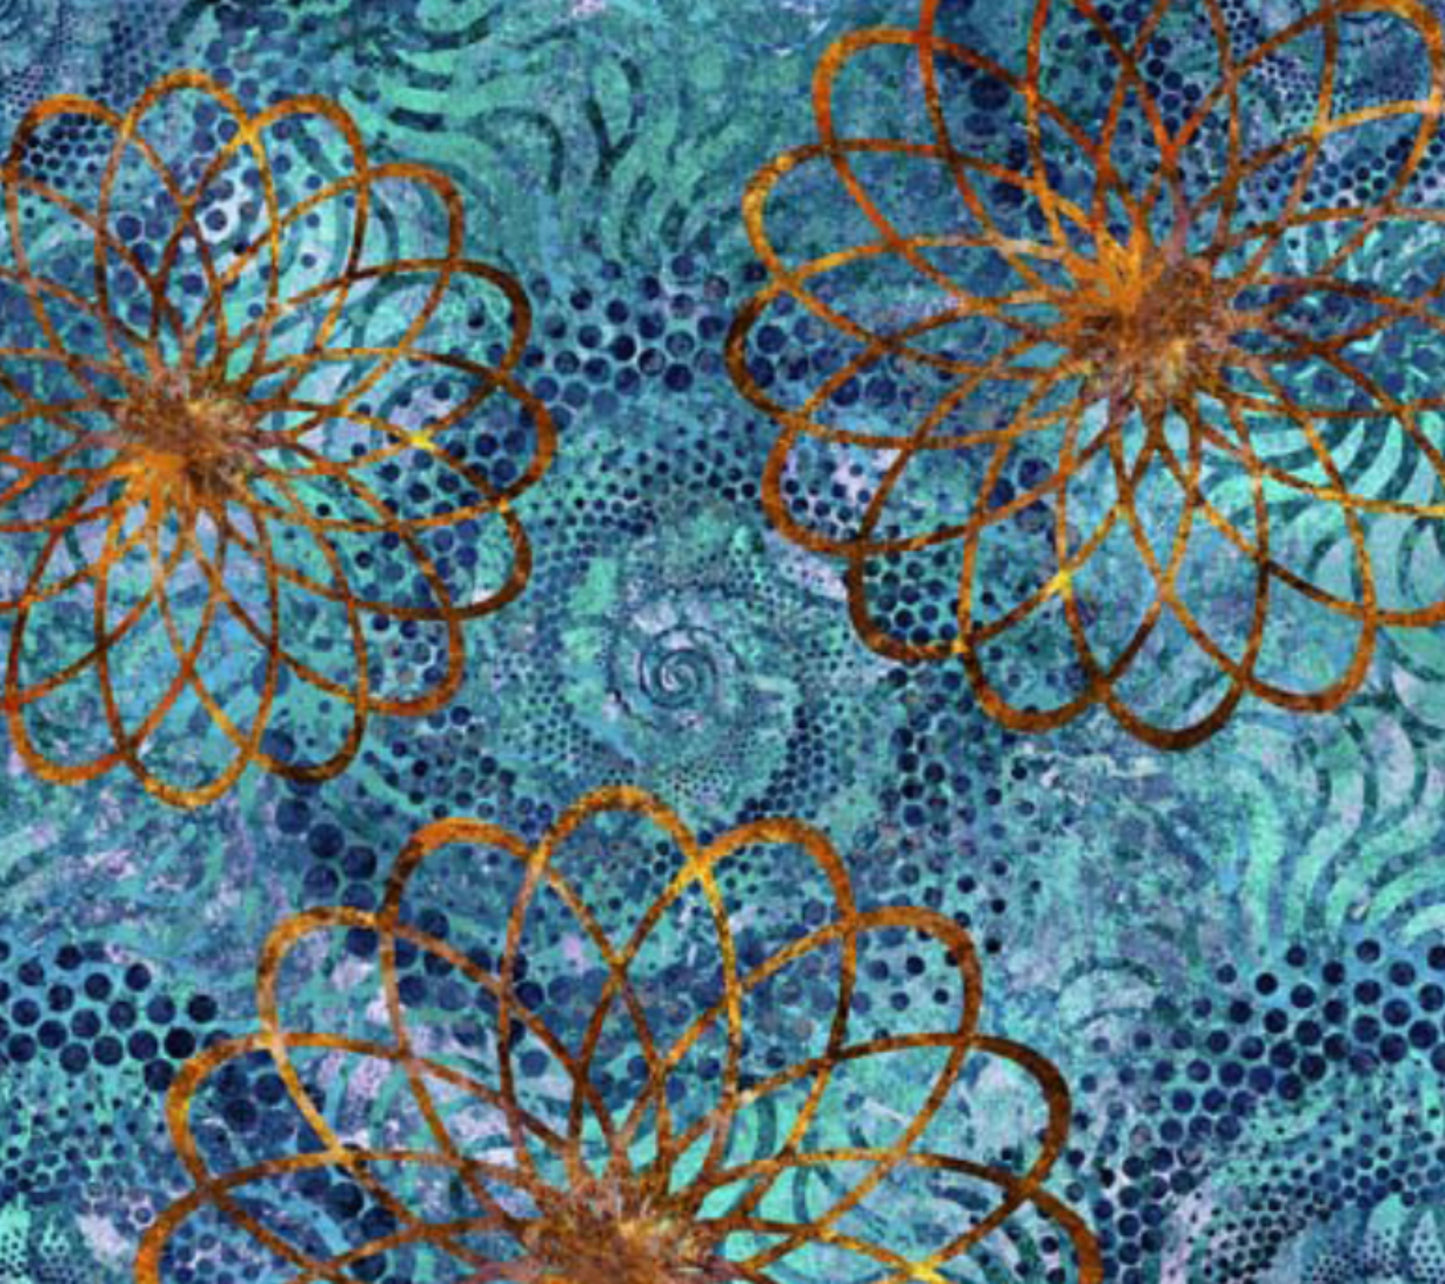 Spiral Floral Fabric - Twilight Collection by Dan Morris for QT Fabrics